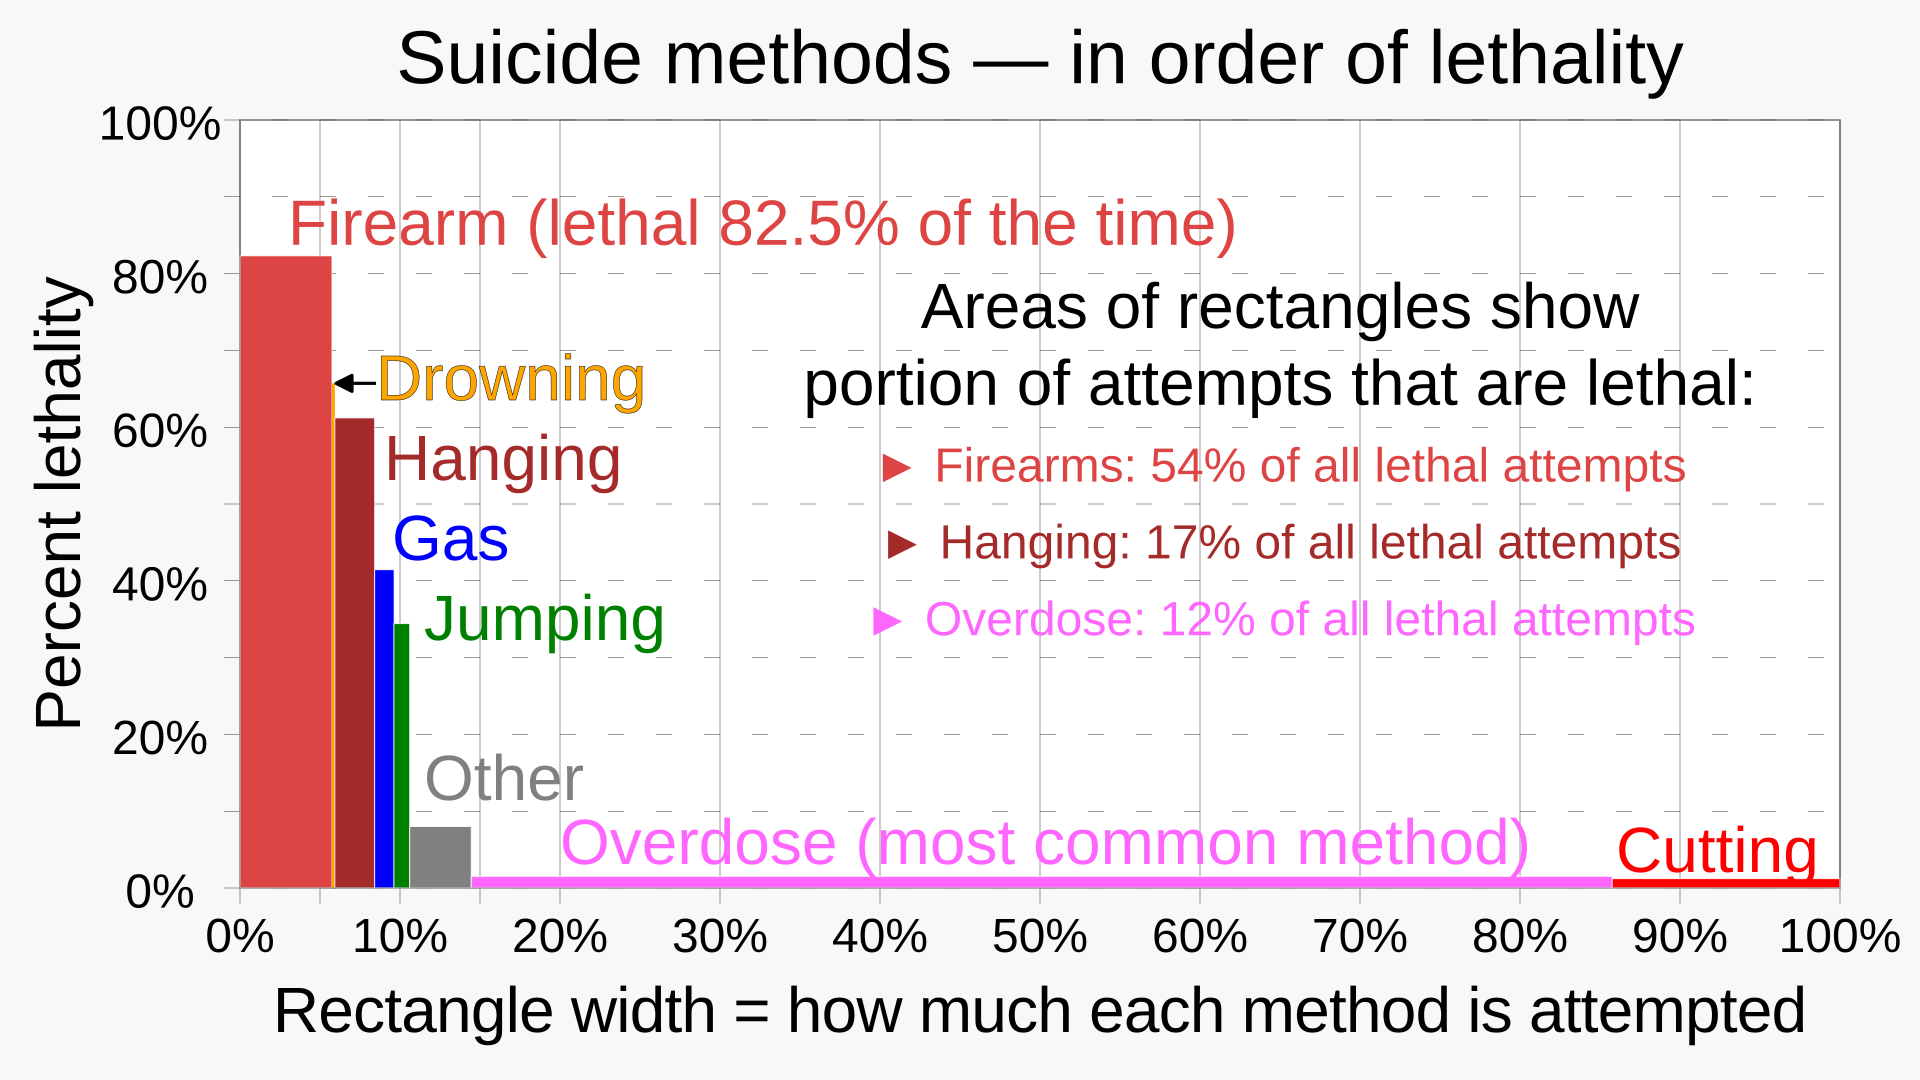 1920px-200012_Suicide_methods_in_order_of_lethality_-_variable-width_bar_chart.svg.png